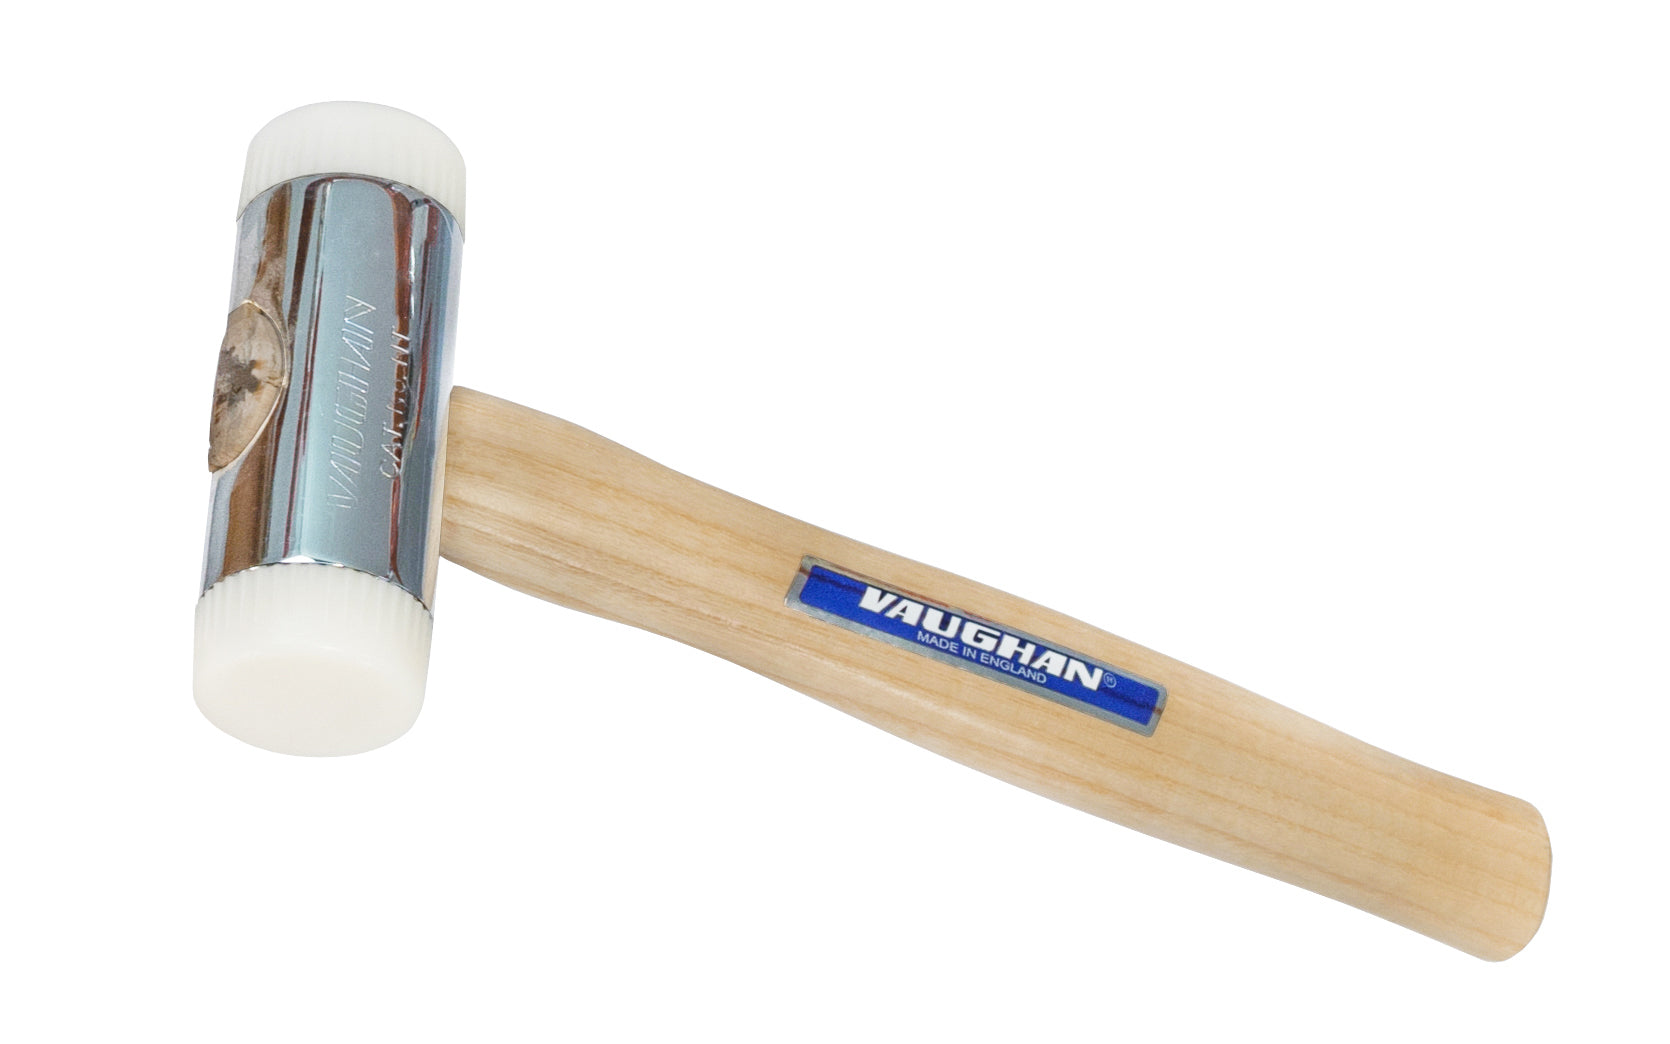 Vaughan Nylon Face Hammer - Made in England ~ Nylon faces thread into hammer head ~ Hardwood Handle ~ Replaceable faces - Replaceable heads - Absorb the force of side blows - NT100 - NT150 - NT200 - Nylon faces thread into hammer head